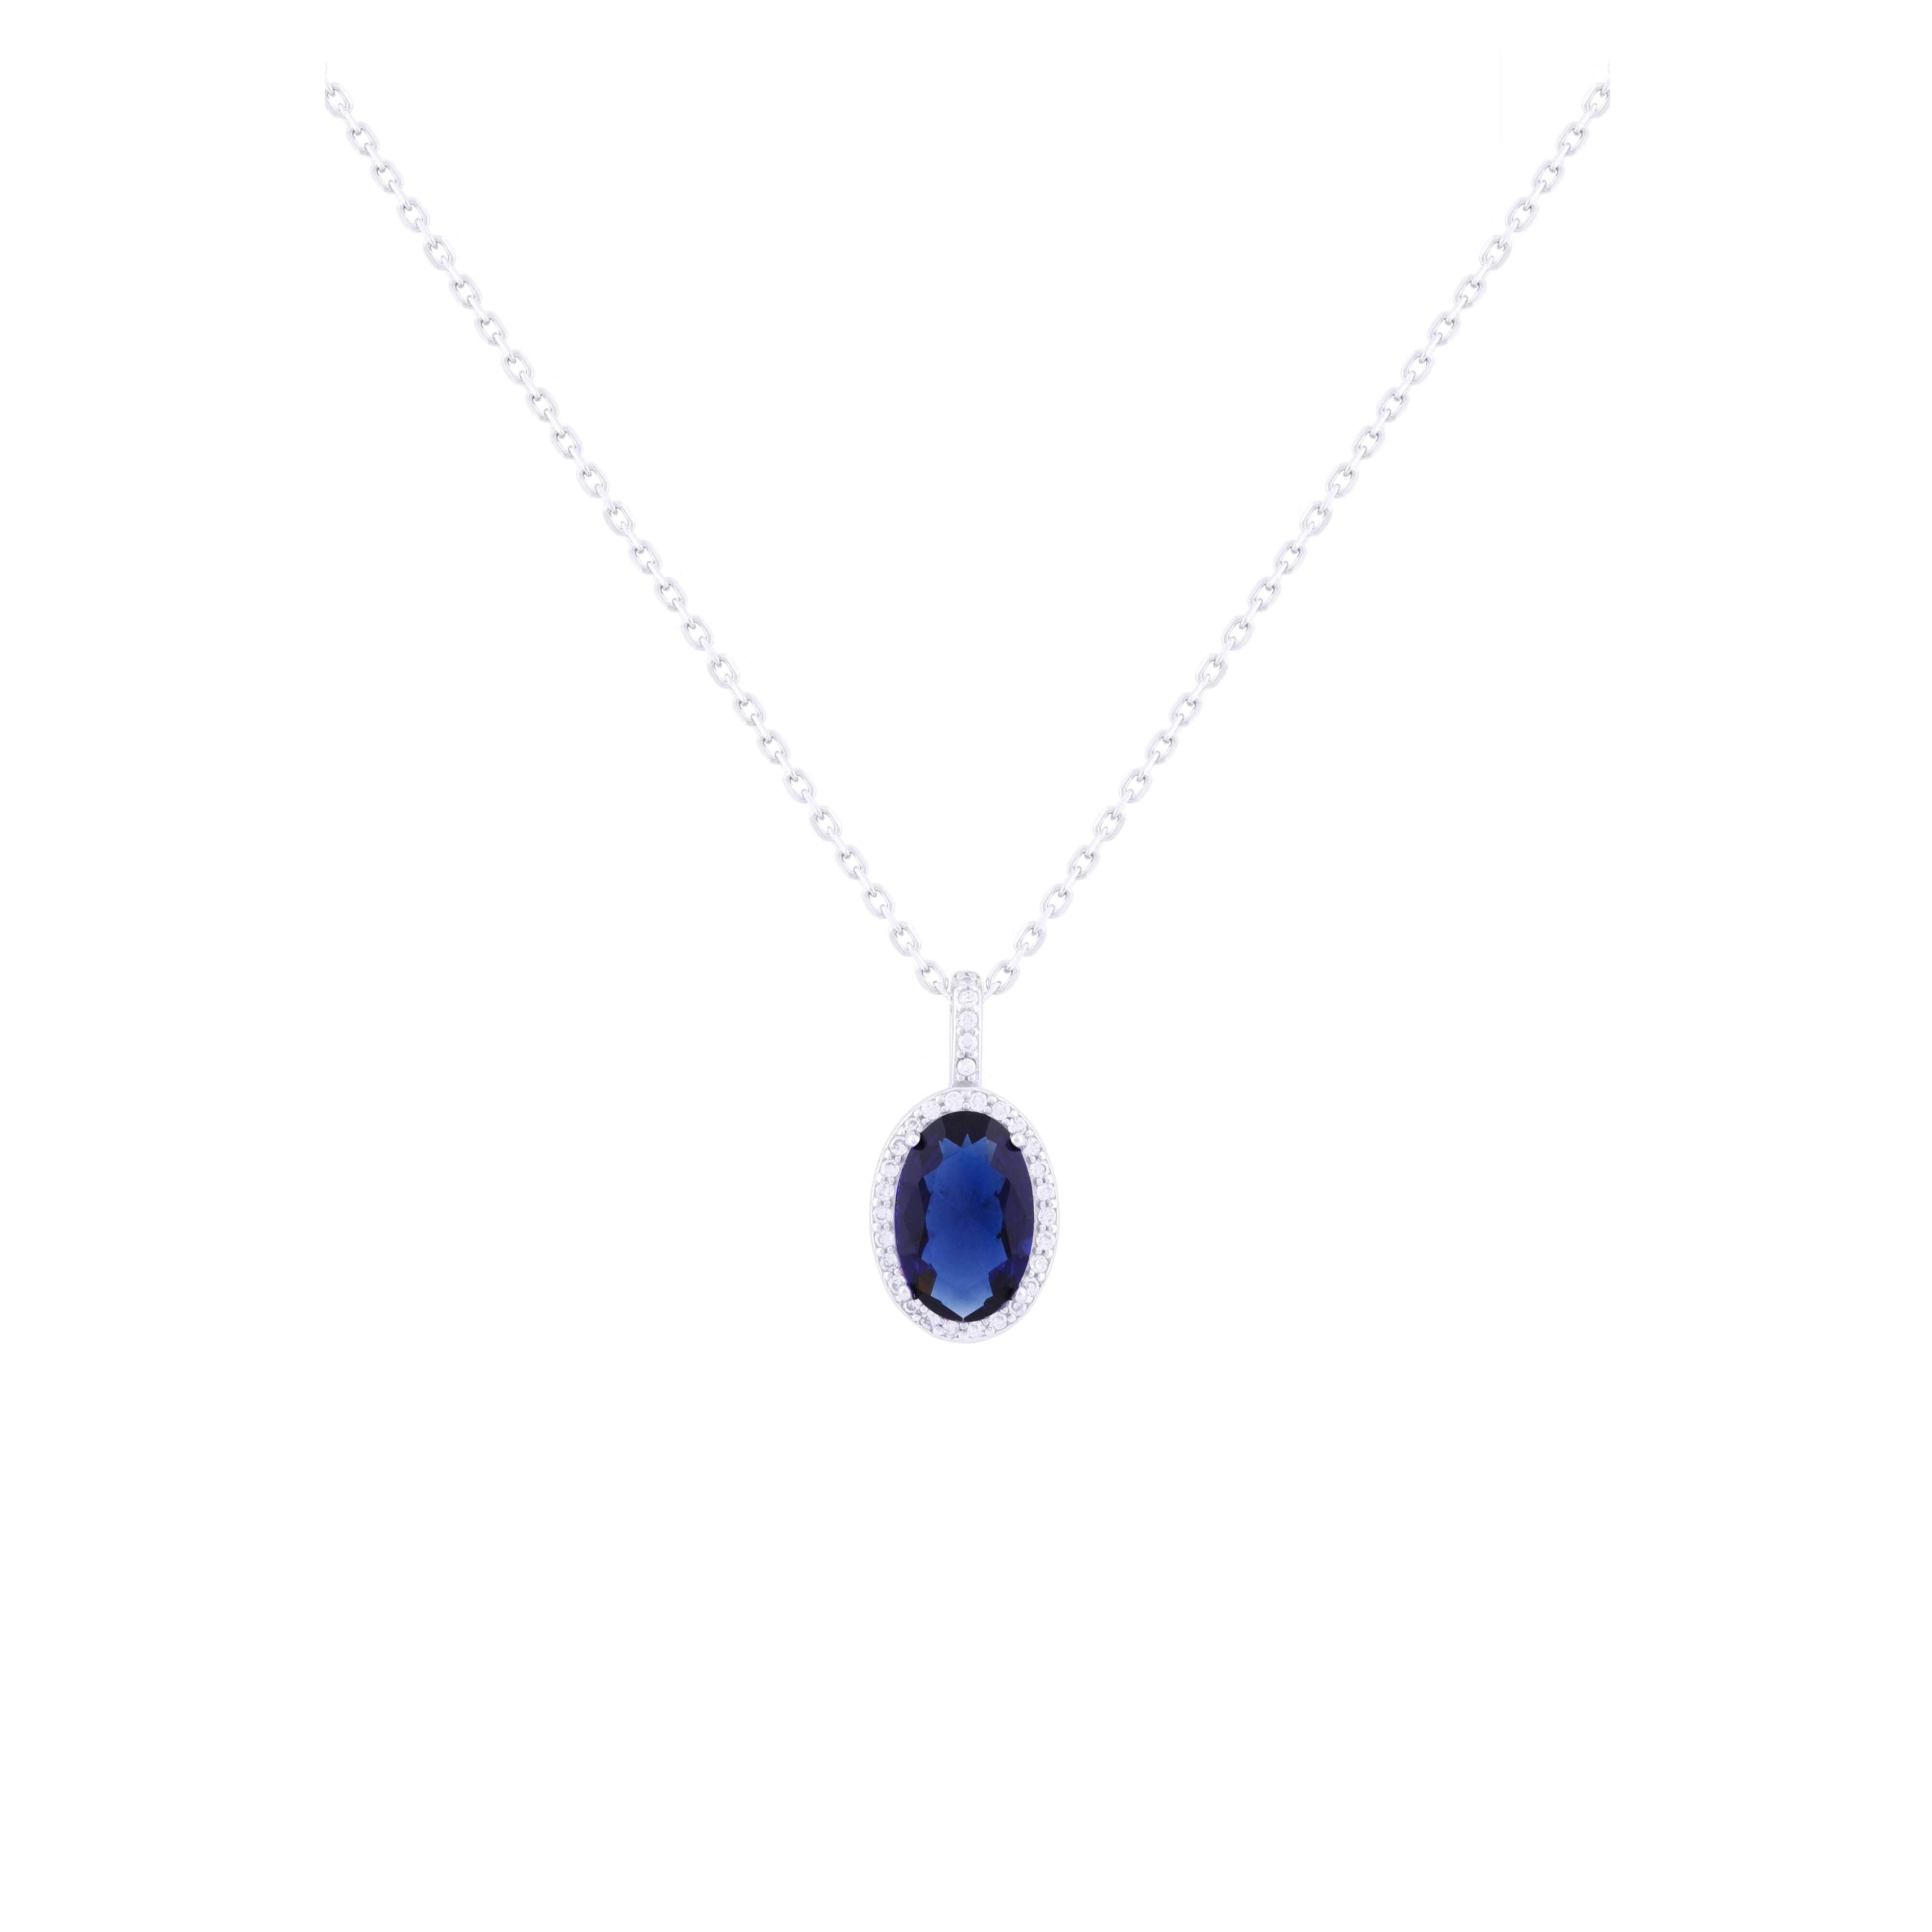 Asfour 925 Sterling Silver Necklace With Blue Oval Pendant